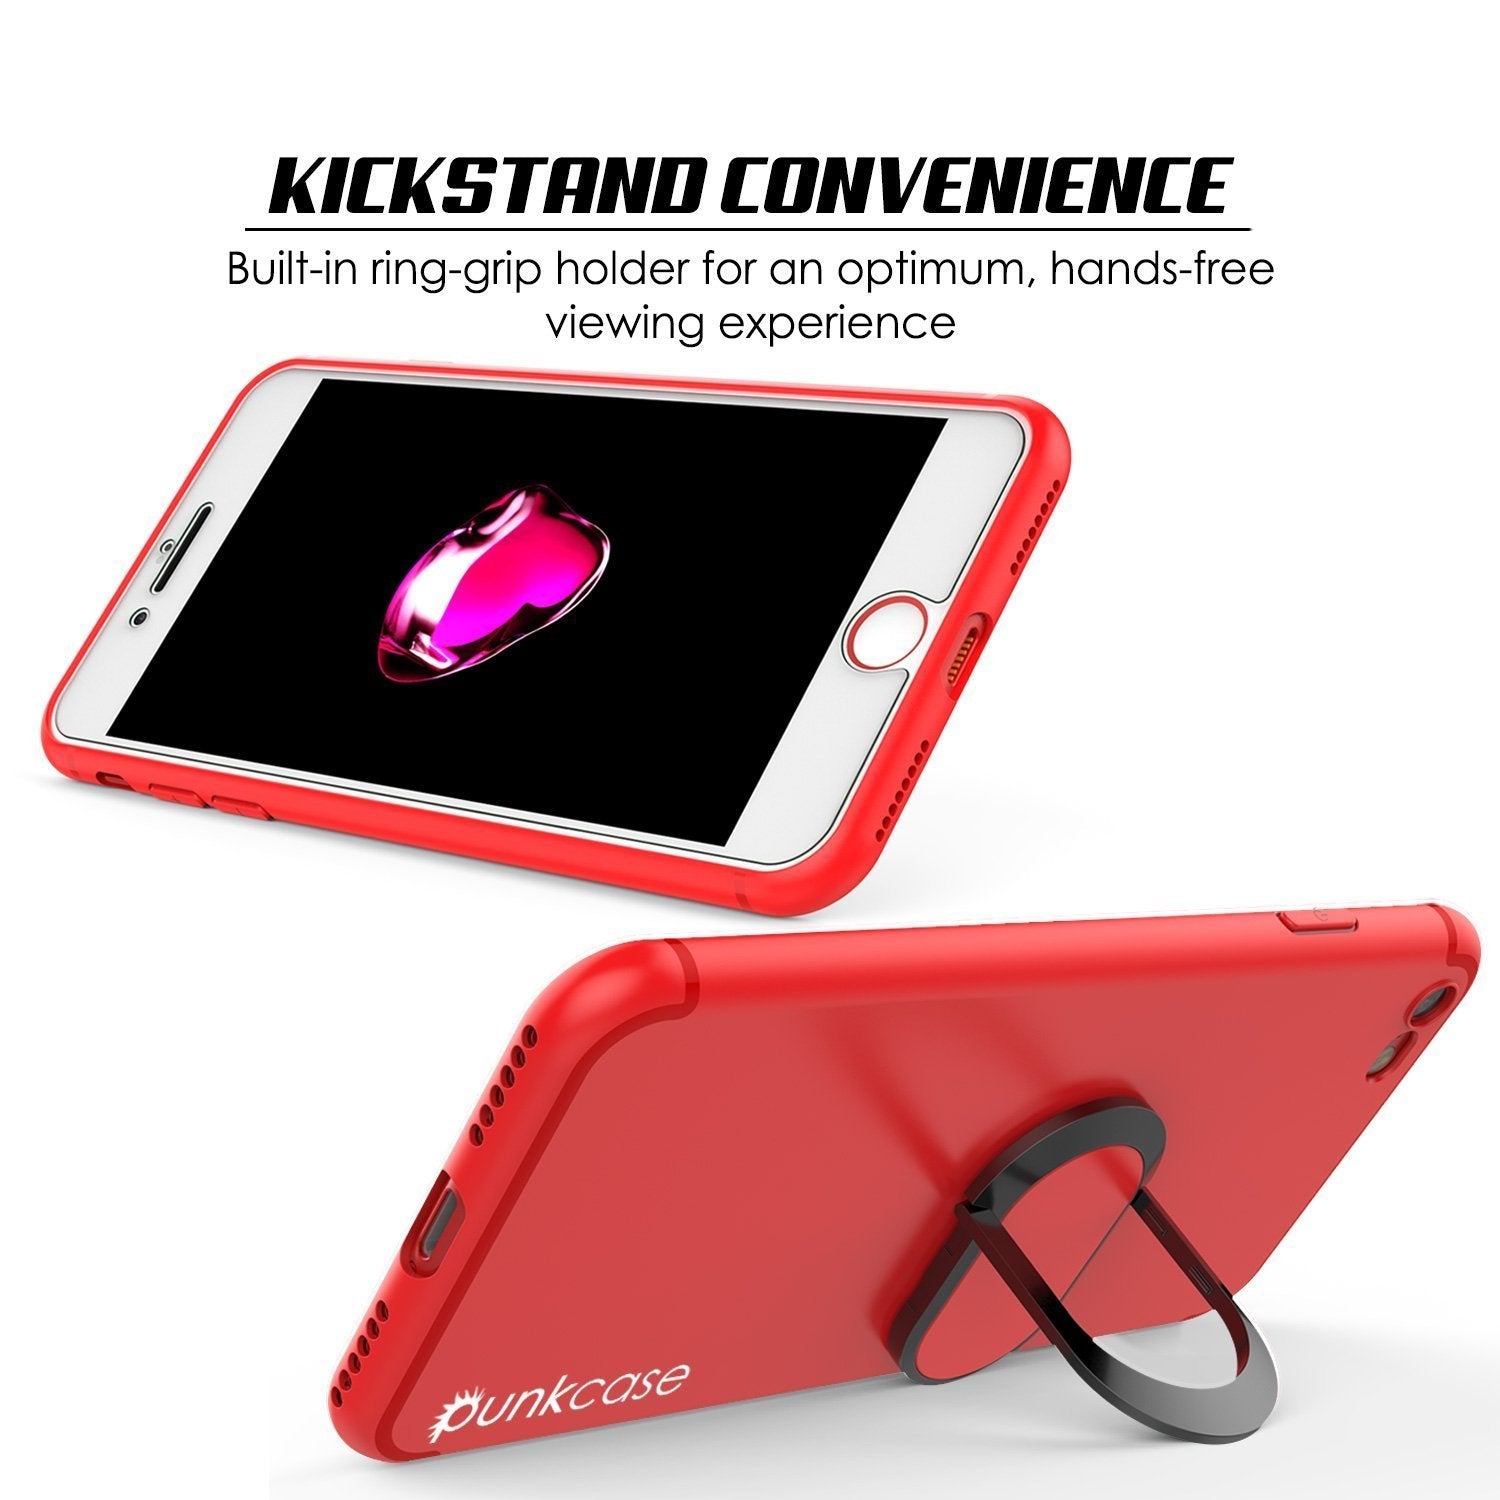 iPhone SE (4.7") Case, Punkcase Magnetix Protective TPU Cover W/ Kickstand, Tempered Glass Screen Protector [Red]